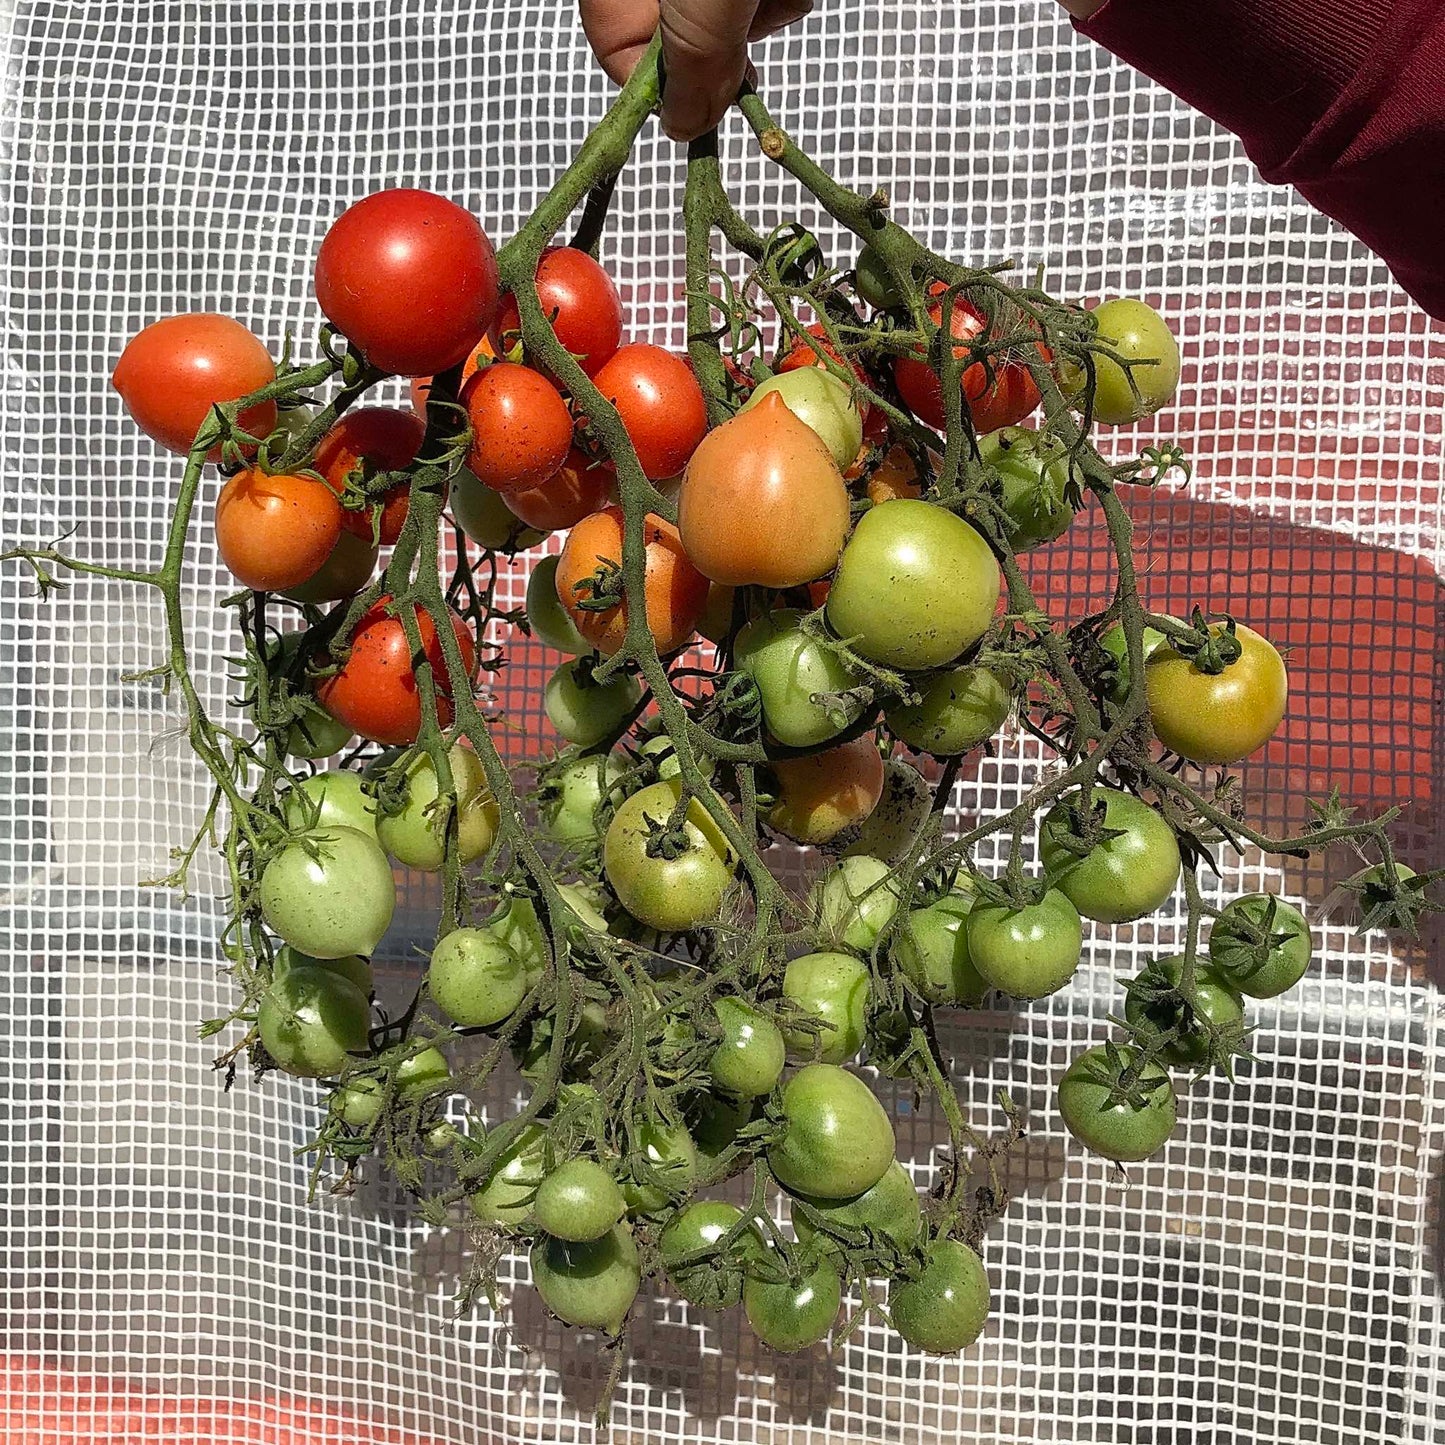 Massive hypertress of small round tomatoes with varying ripeness.